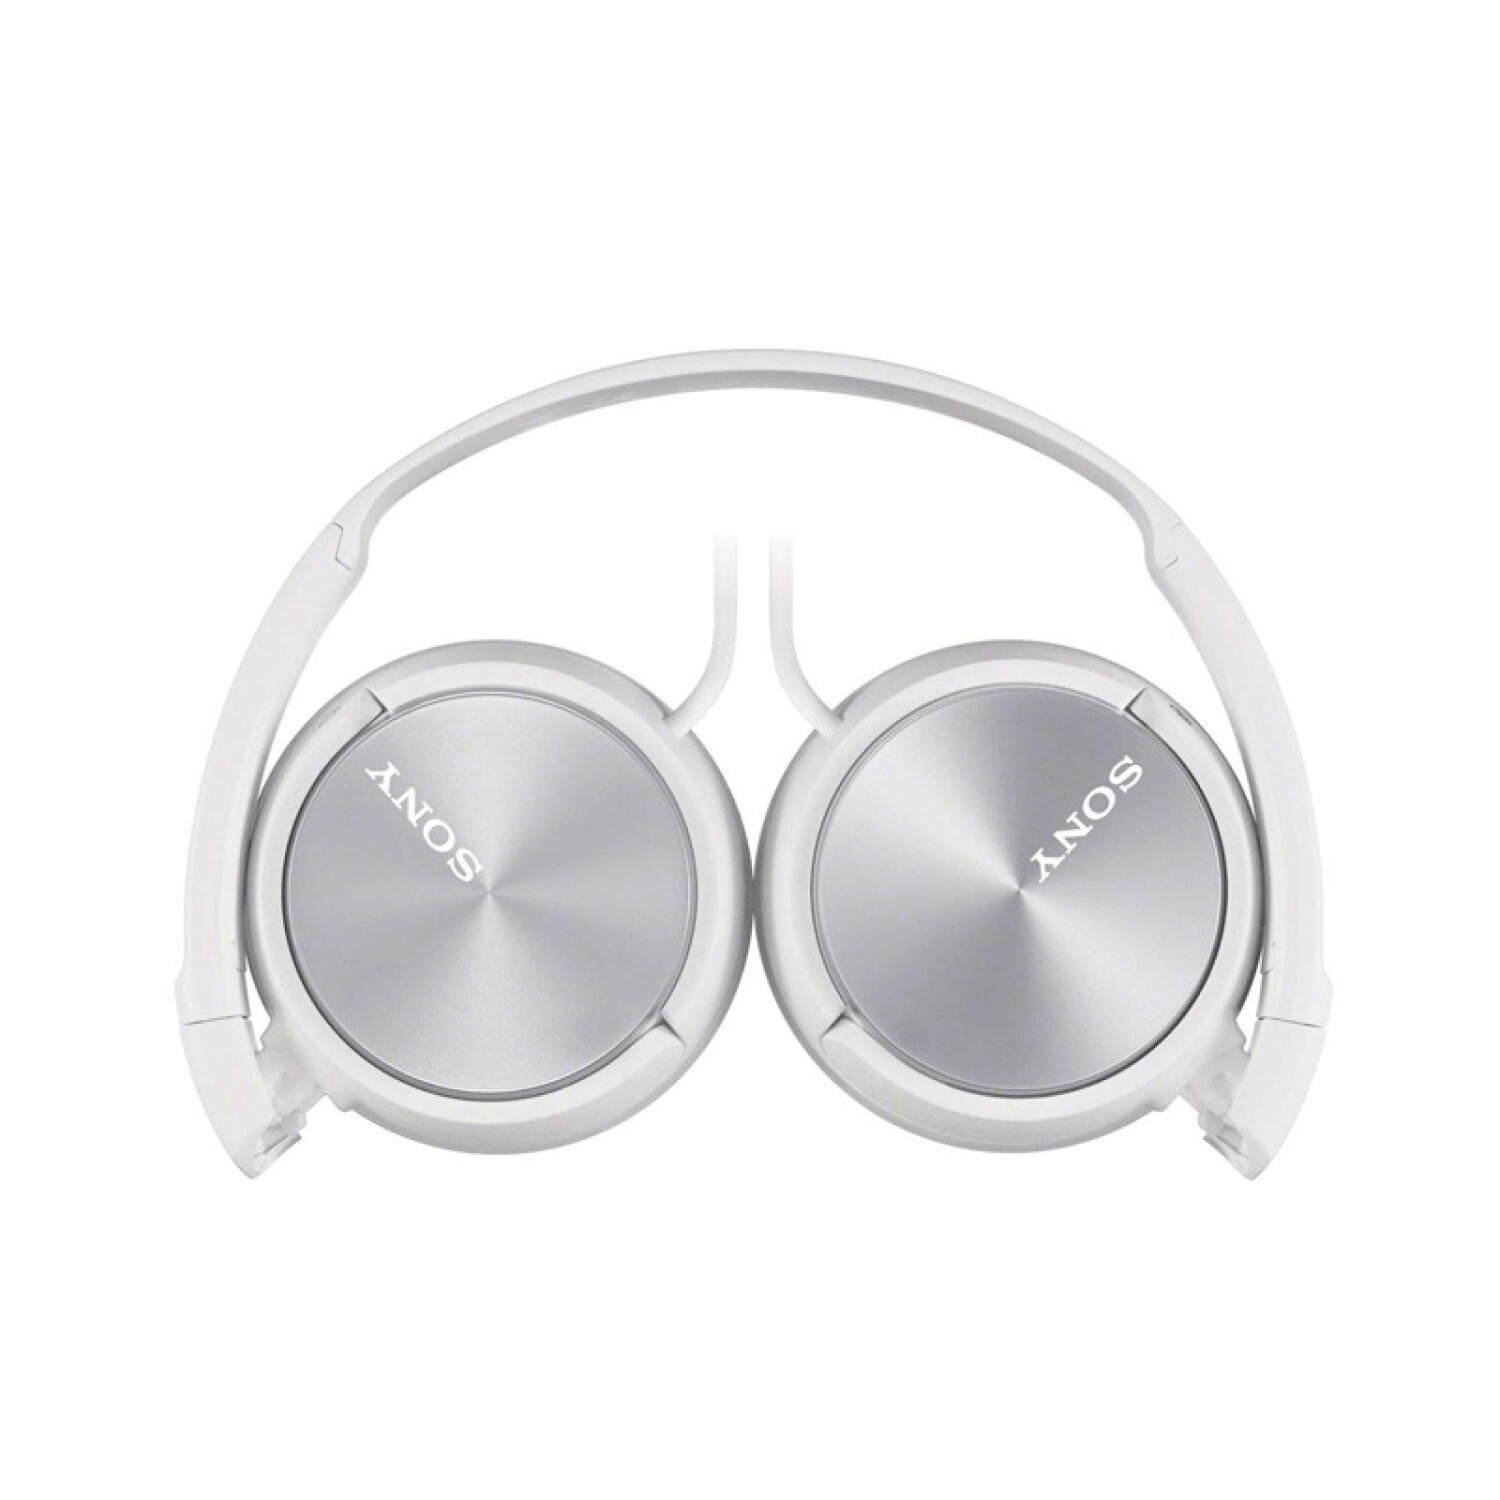 SONY AURICULAR CON CABLE MDR-ZX310 BLANCO